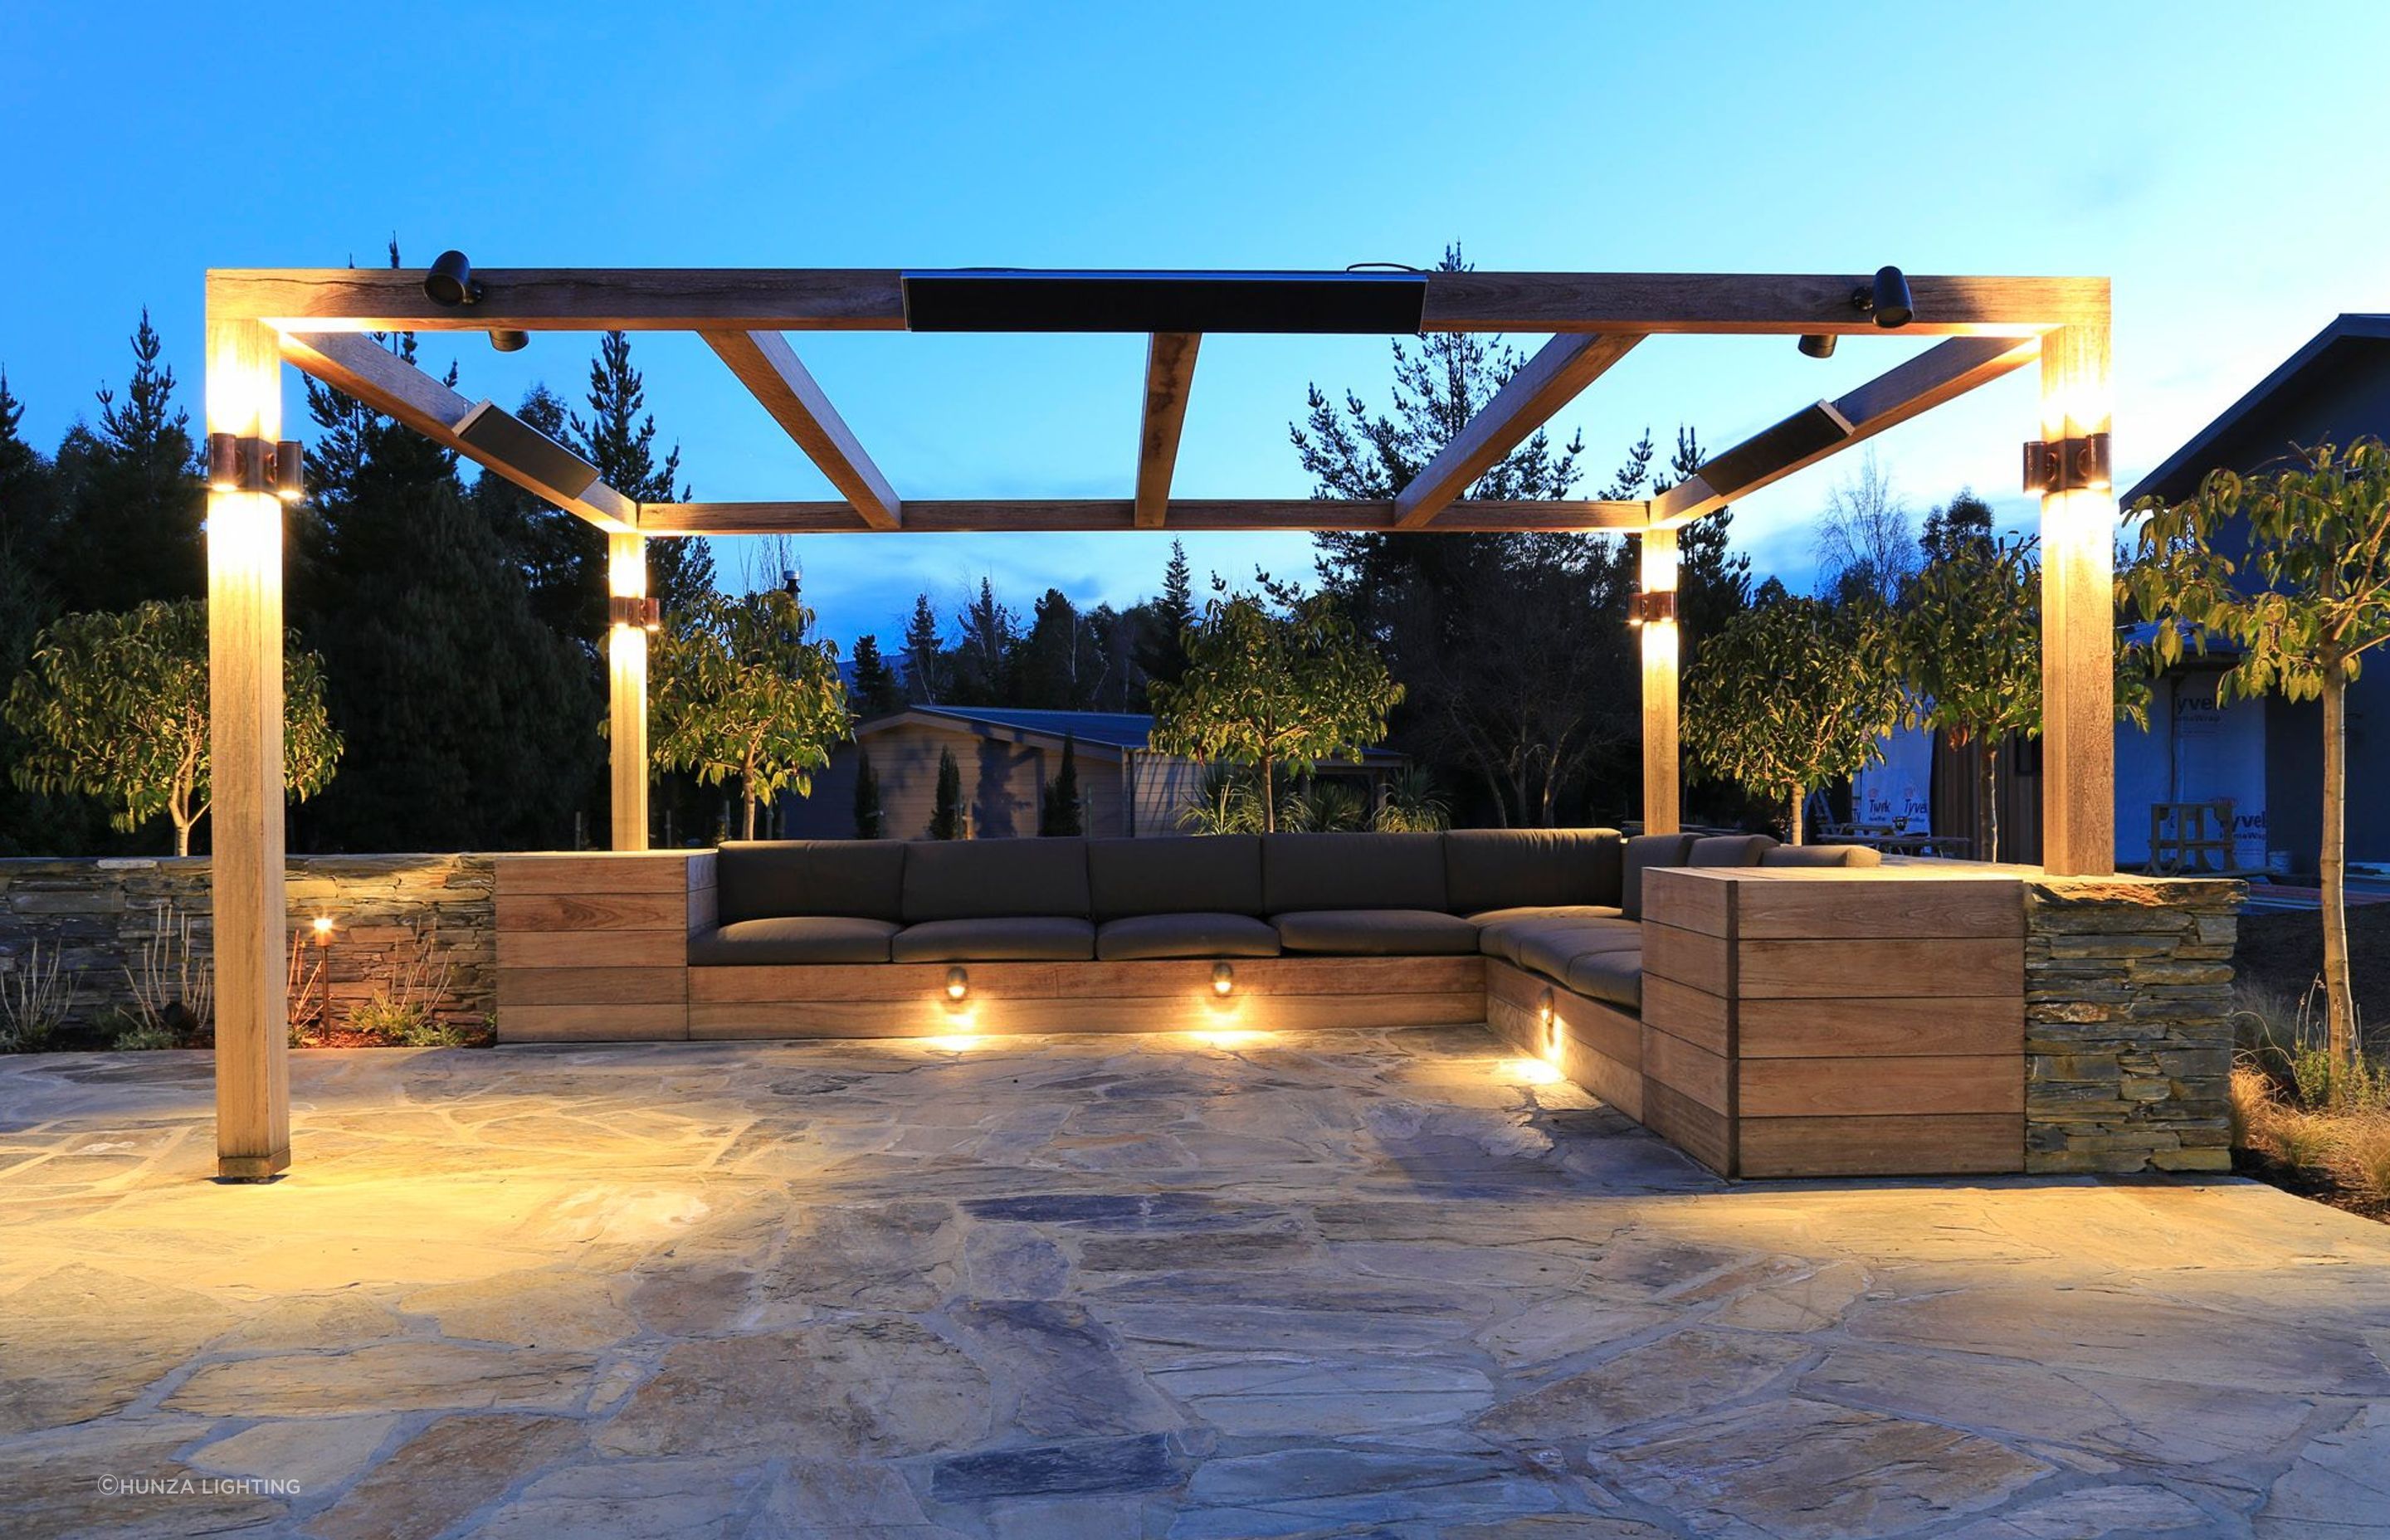 By keeping the lighting low and to the periphery, Lighting Revolution have created a functional and visually stunning outdoor space.